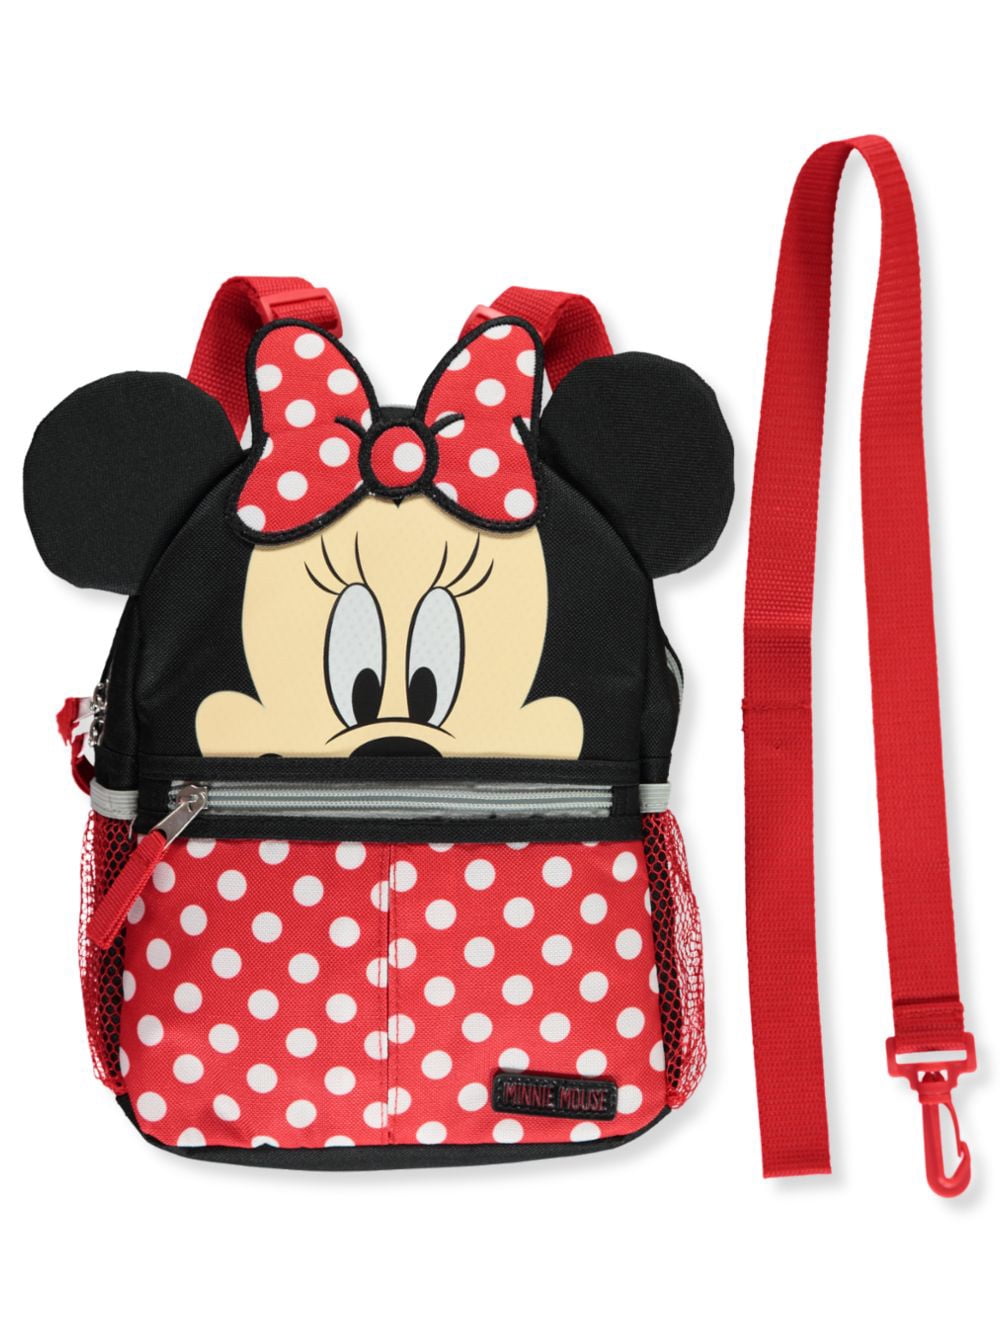 Backpack - Disneys Minnie Mouse Pink/Violet Heart Theme 